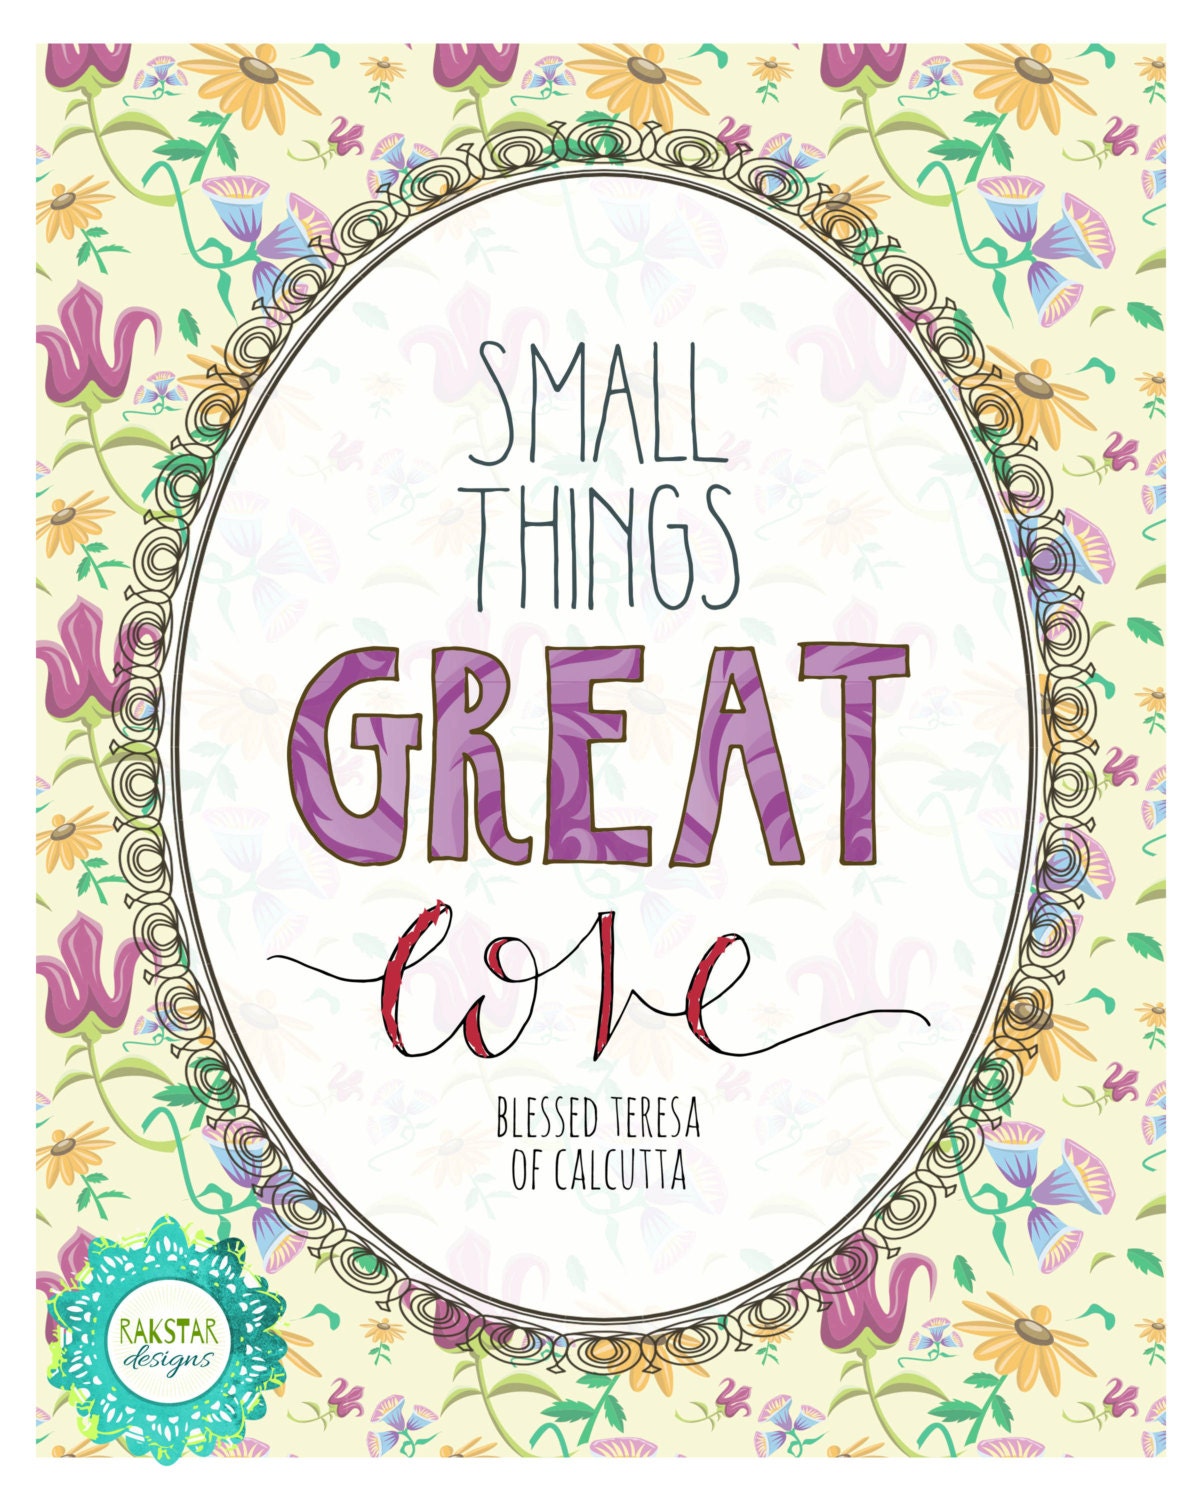 Catholic PRINTABLE Small Things Great Love Floral Vintage Style Handlettered Inspirational Mother Teresa Quote Christian Print 8x10